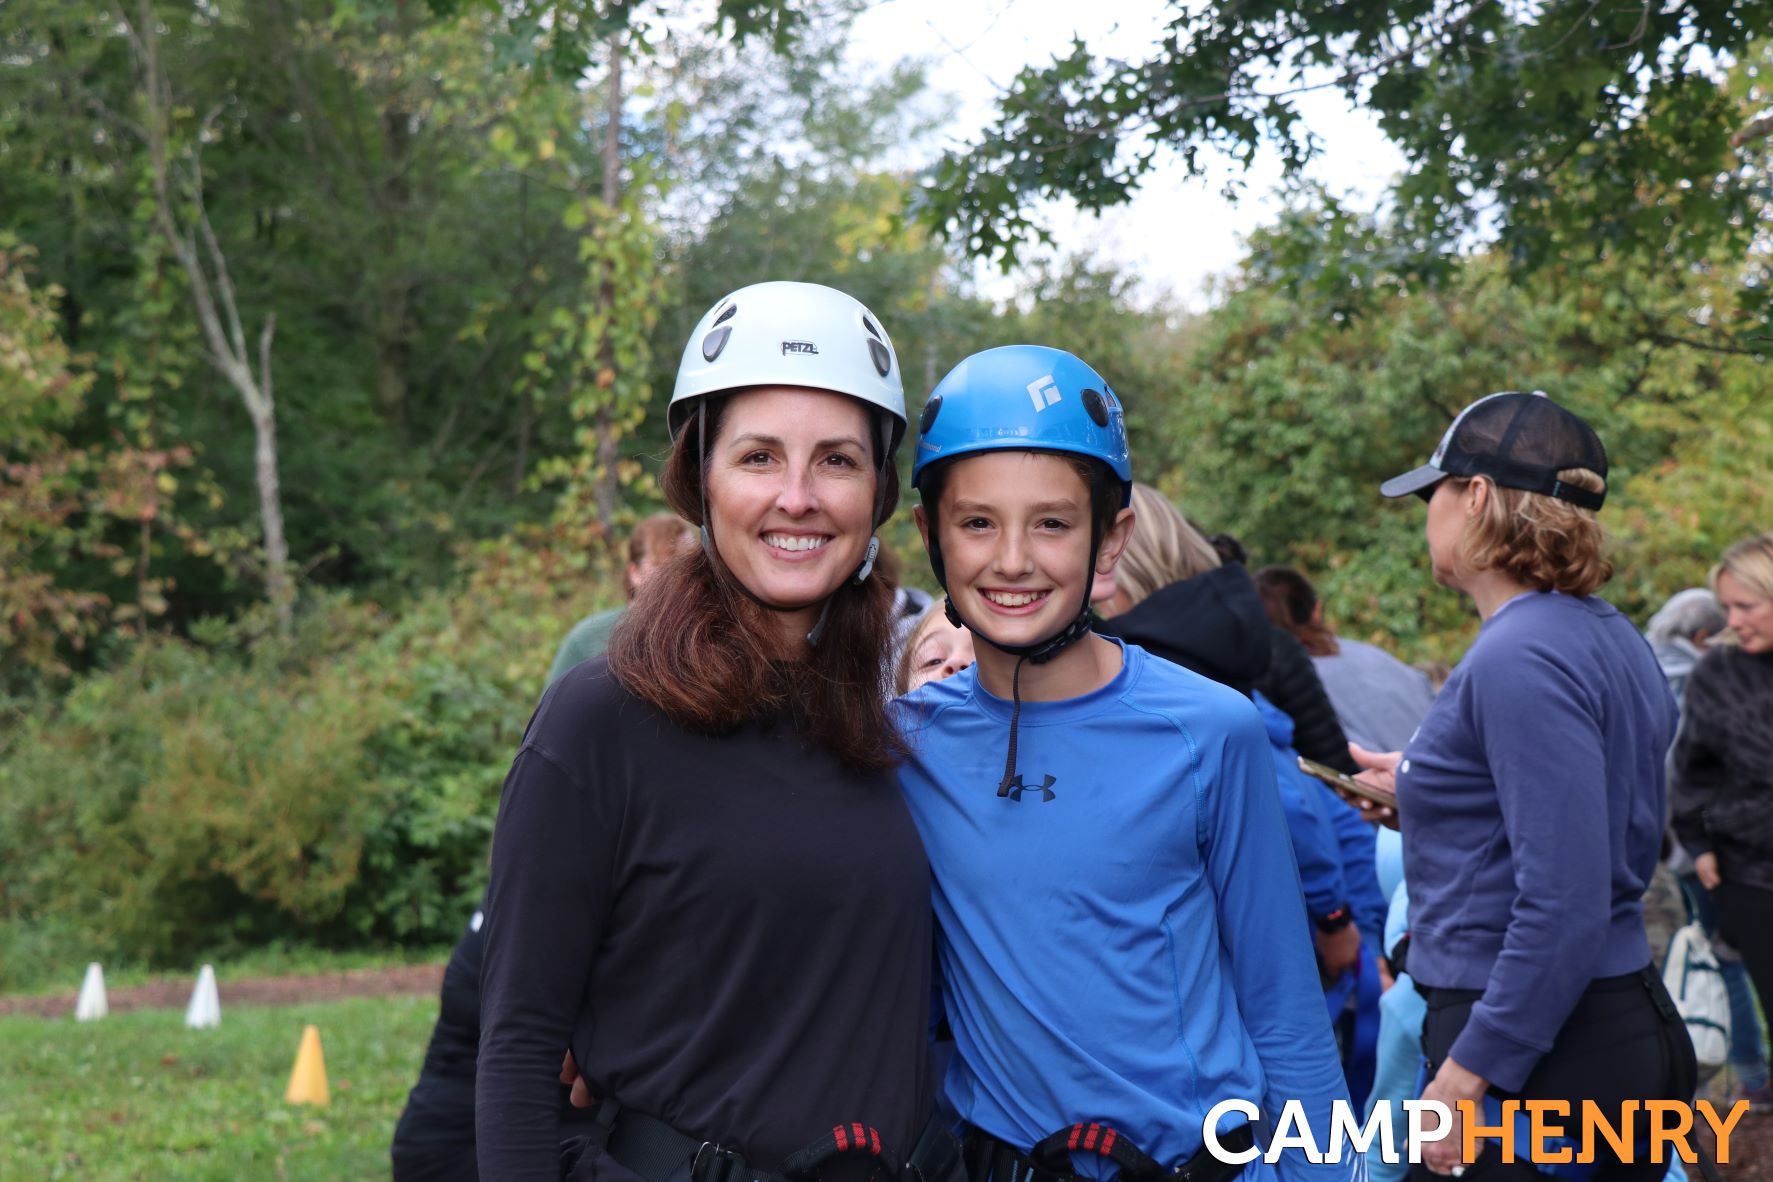 Mom and son smiling before going on the Giant Swing at Camp Henry